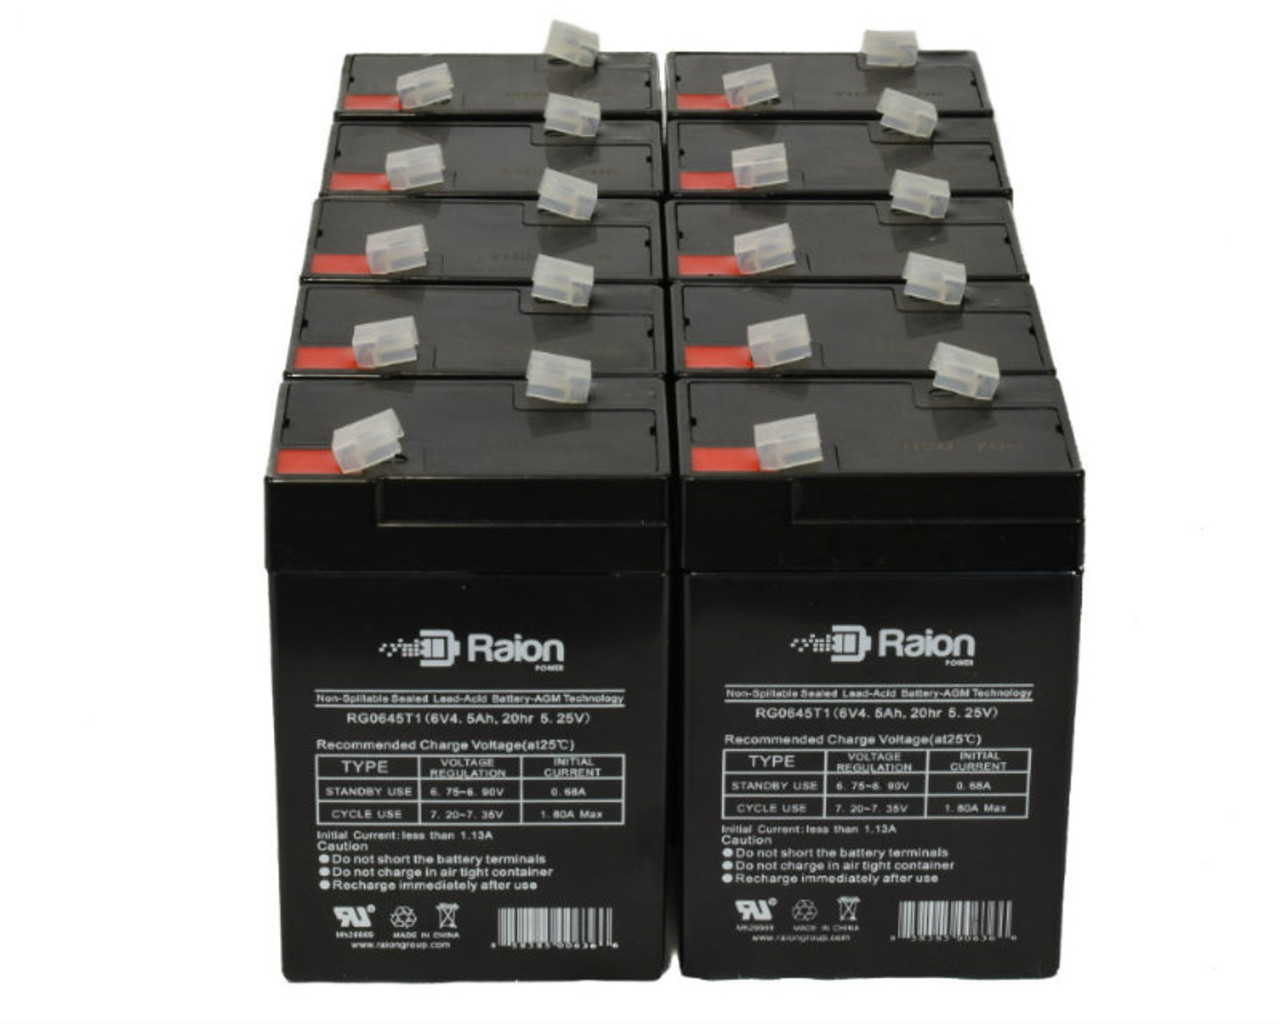 Raion Power 6V 4.5Ah Replacement Emergency Light Battery for Edwards 1799112WL - 10 Pack